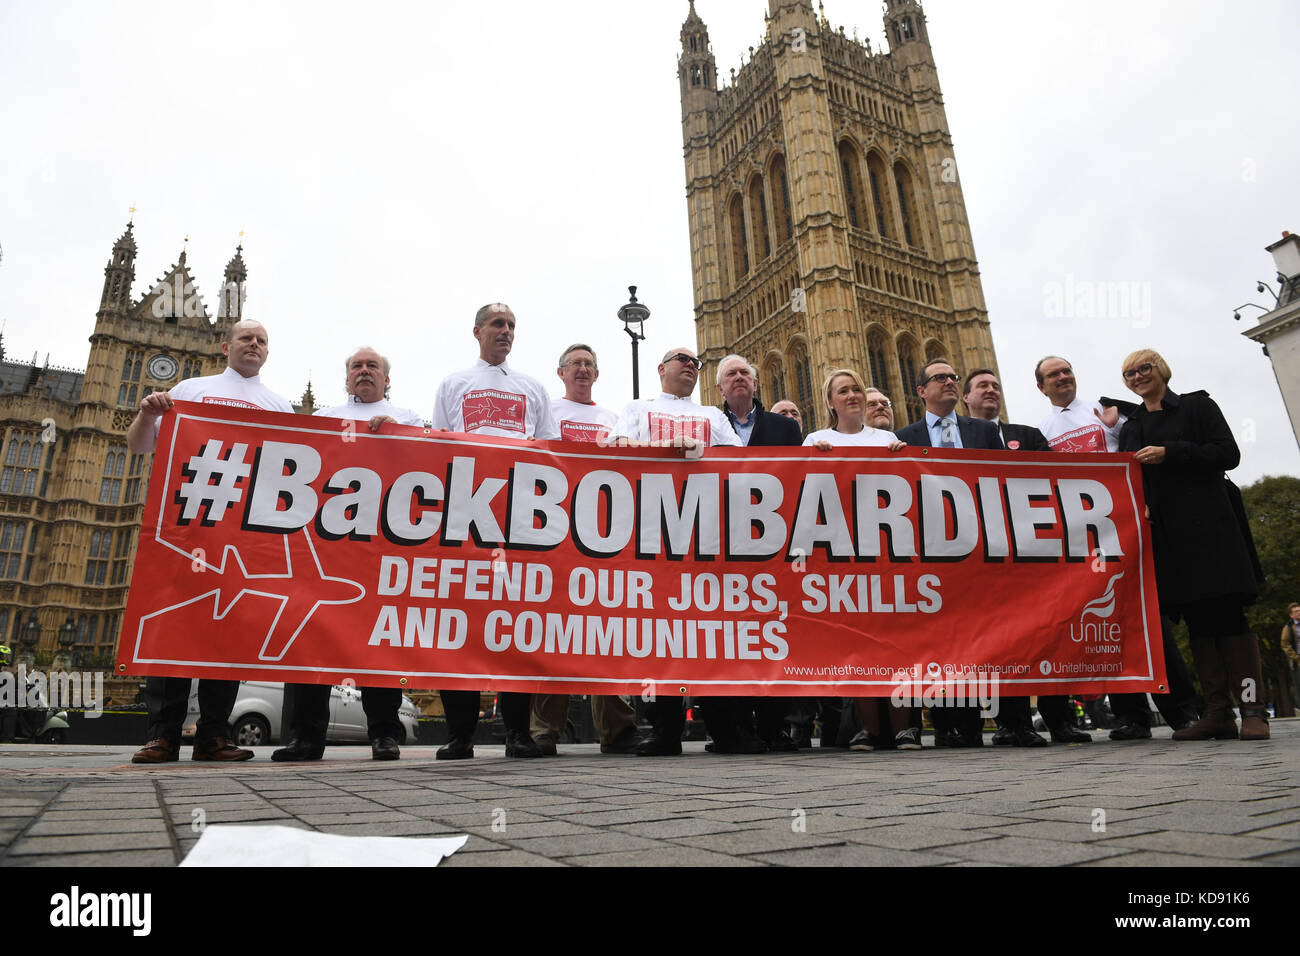 Labour MP Owen Smith (fourth right) with workers from plane manufacturer Bombardier lobbying the Houses of Parliament in central London as they press for Government action to help secure their jobs in the face of the trade dispute with the United States. PRESS ASSOCIATION Photo. PRESS ASSOCIATION Photo. Picture date: Wednesday October 11, 2017. Bombardier, which employs more than 4,000 workers in Belfast, has been hit by a proposed 80% levy on exports following complaints by Boeing that the Canadian-owned company had dumped its C Series jets at 'absurdly low' prices. See PA story INDUSTRY Bom Stock Photo